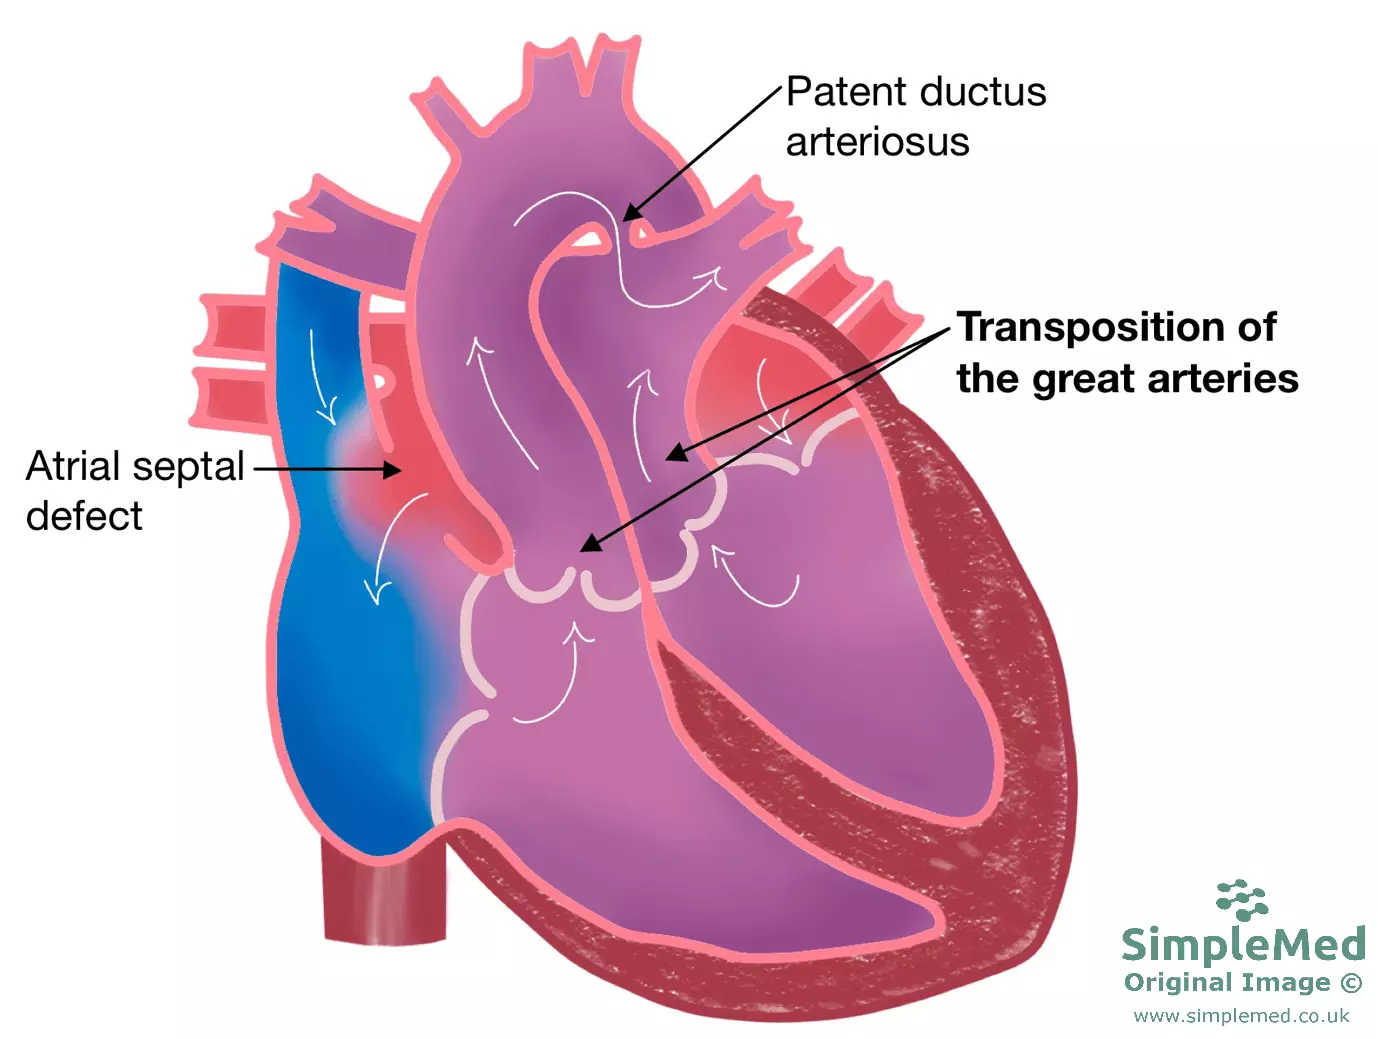 Transposition of the Great Arteries SimpleMed